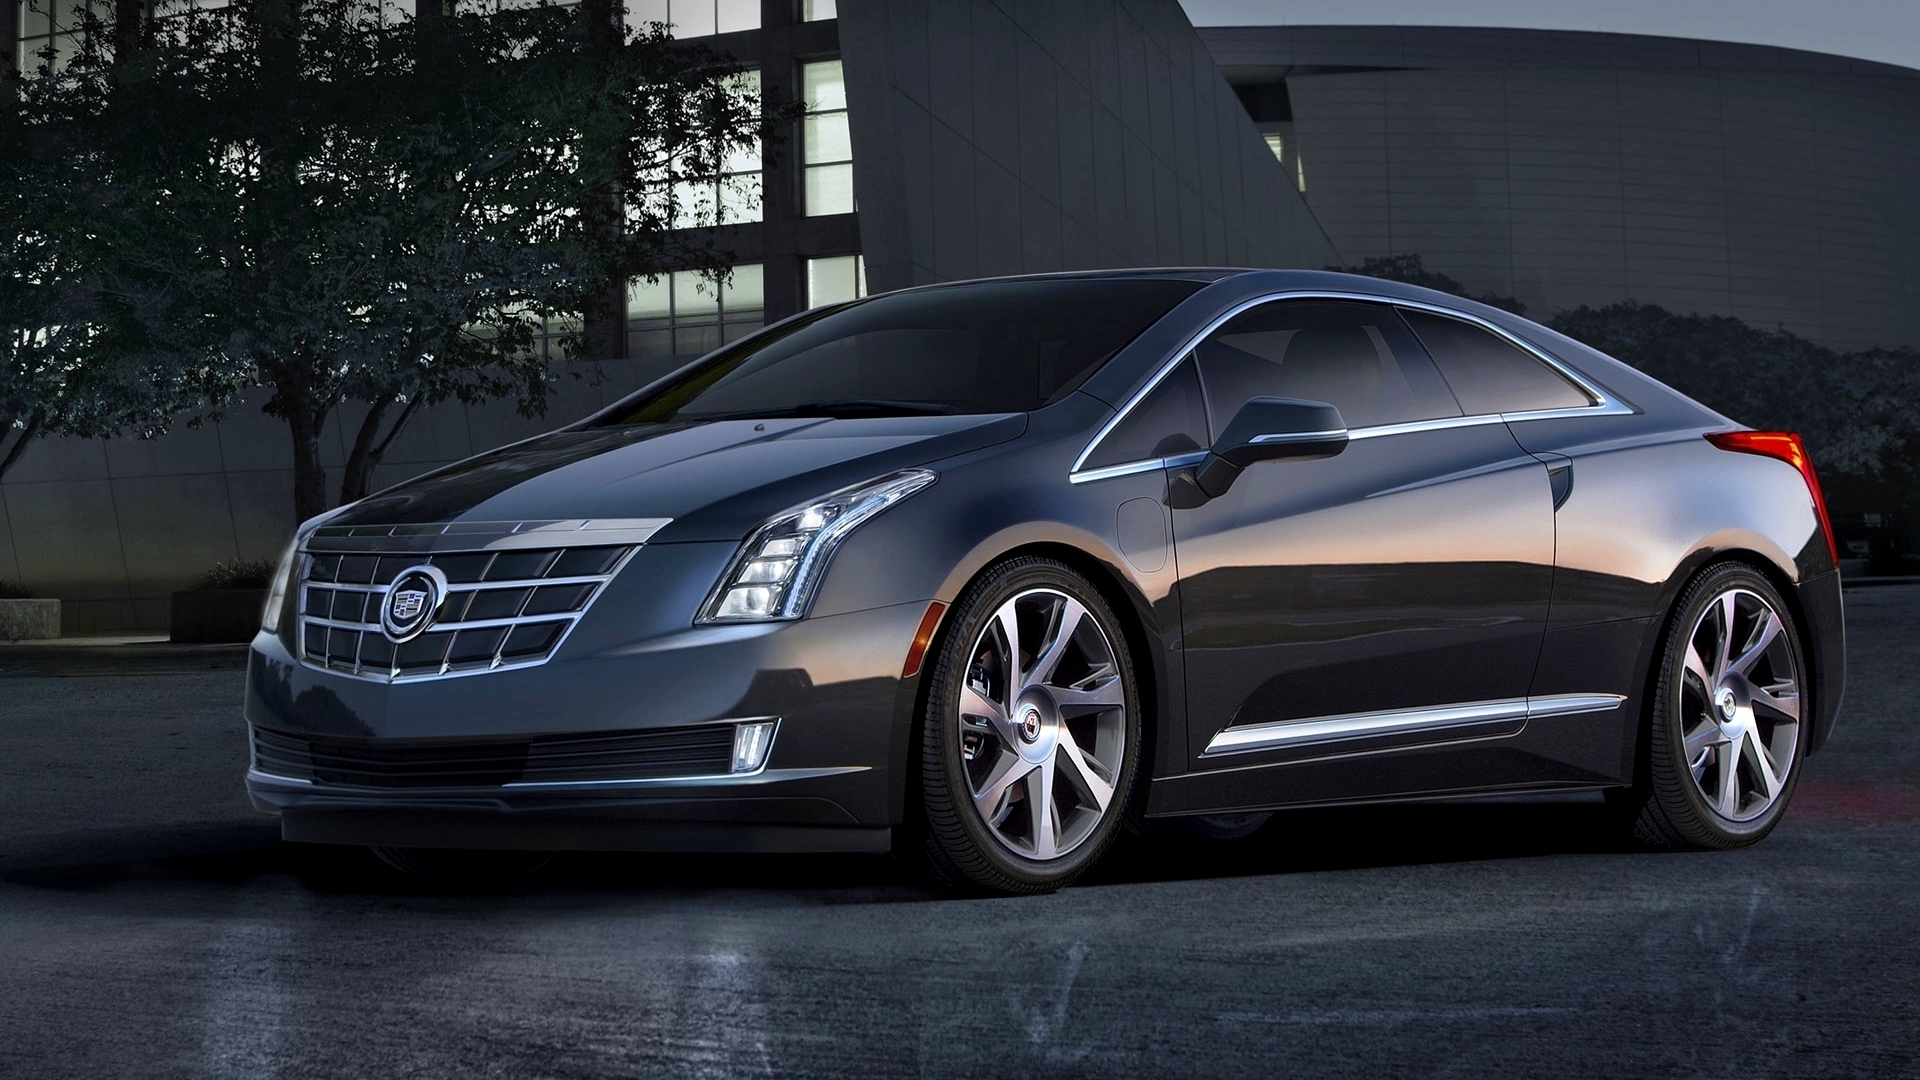 Cadillac ELR 2014 for 1920 x 1080 HDTV 1080p resolution